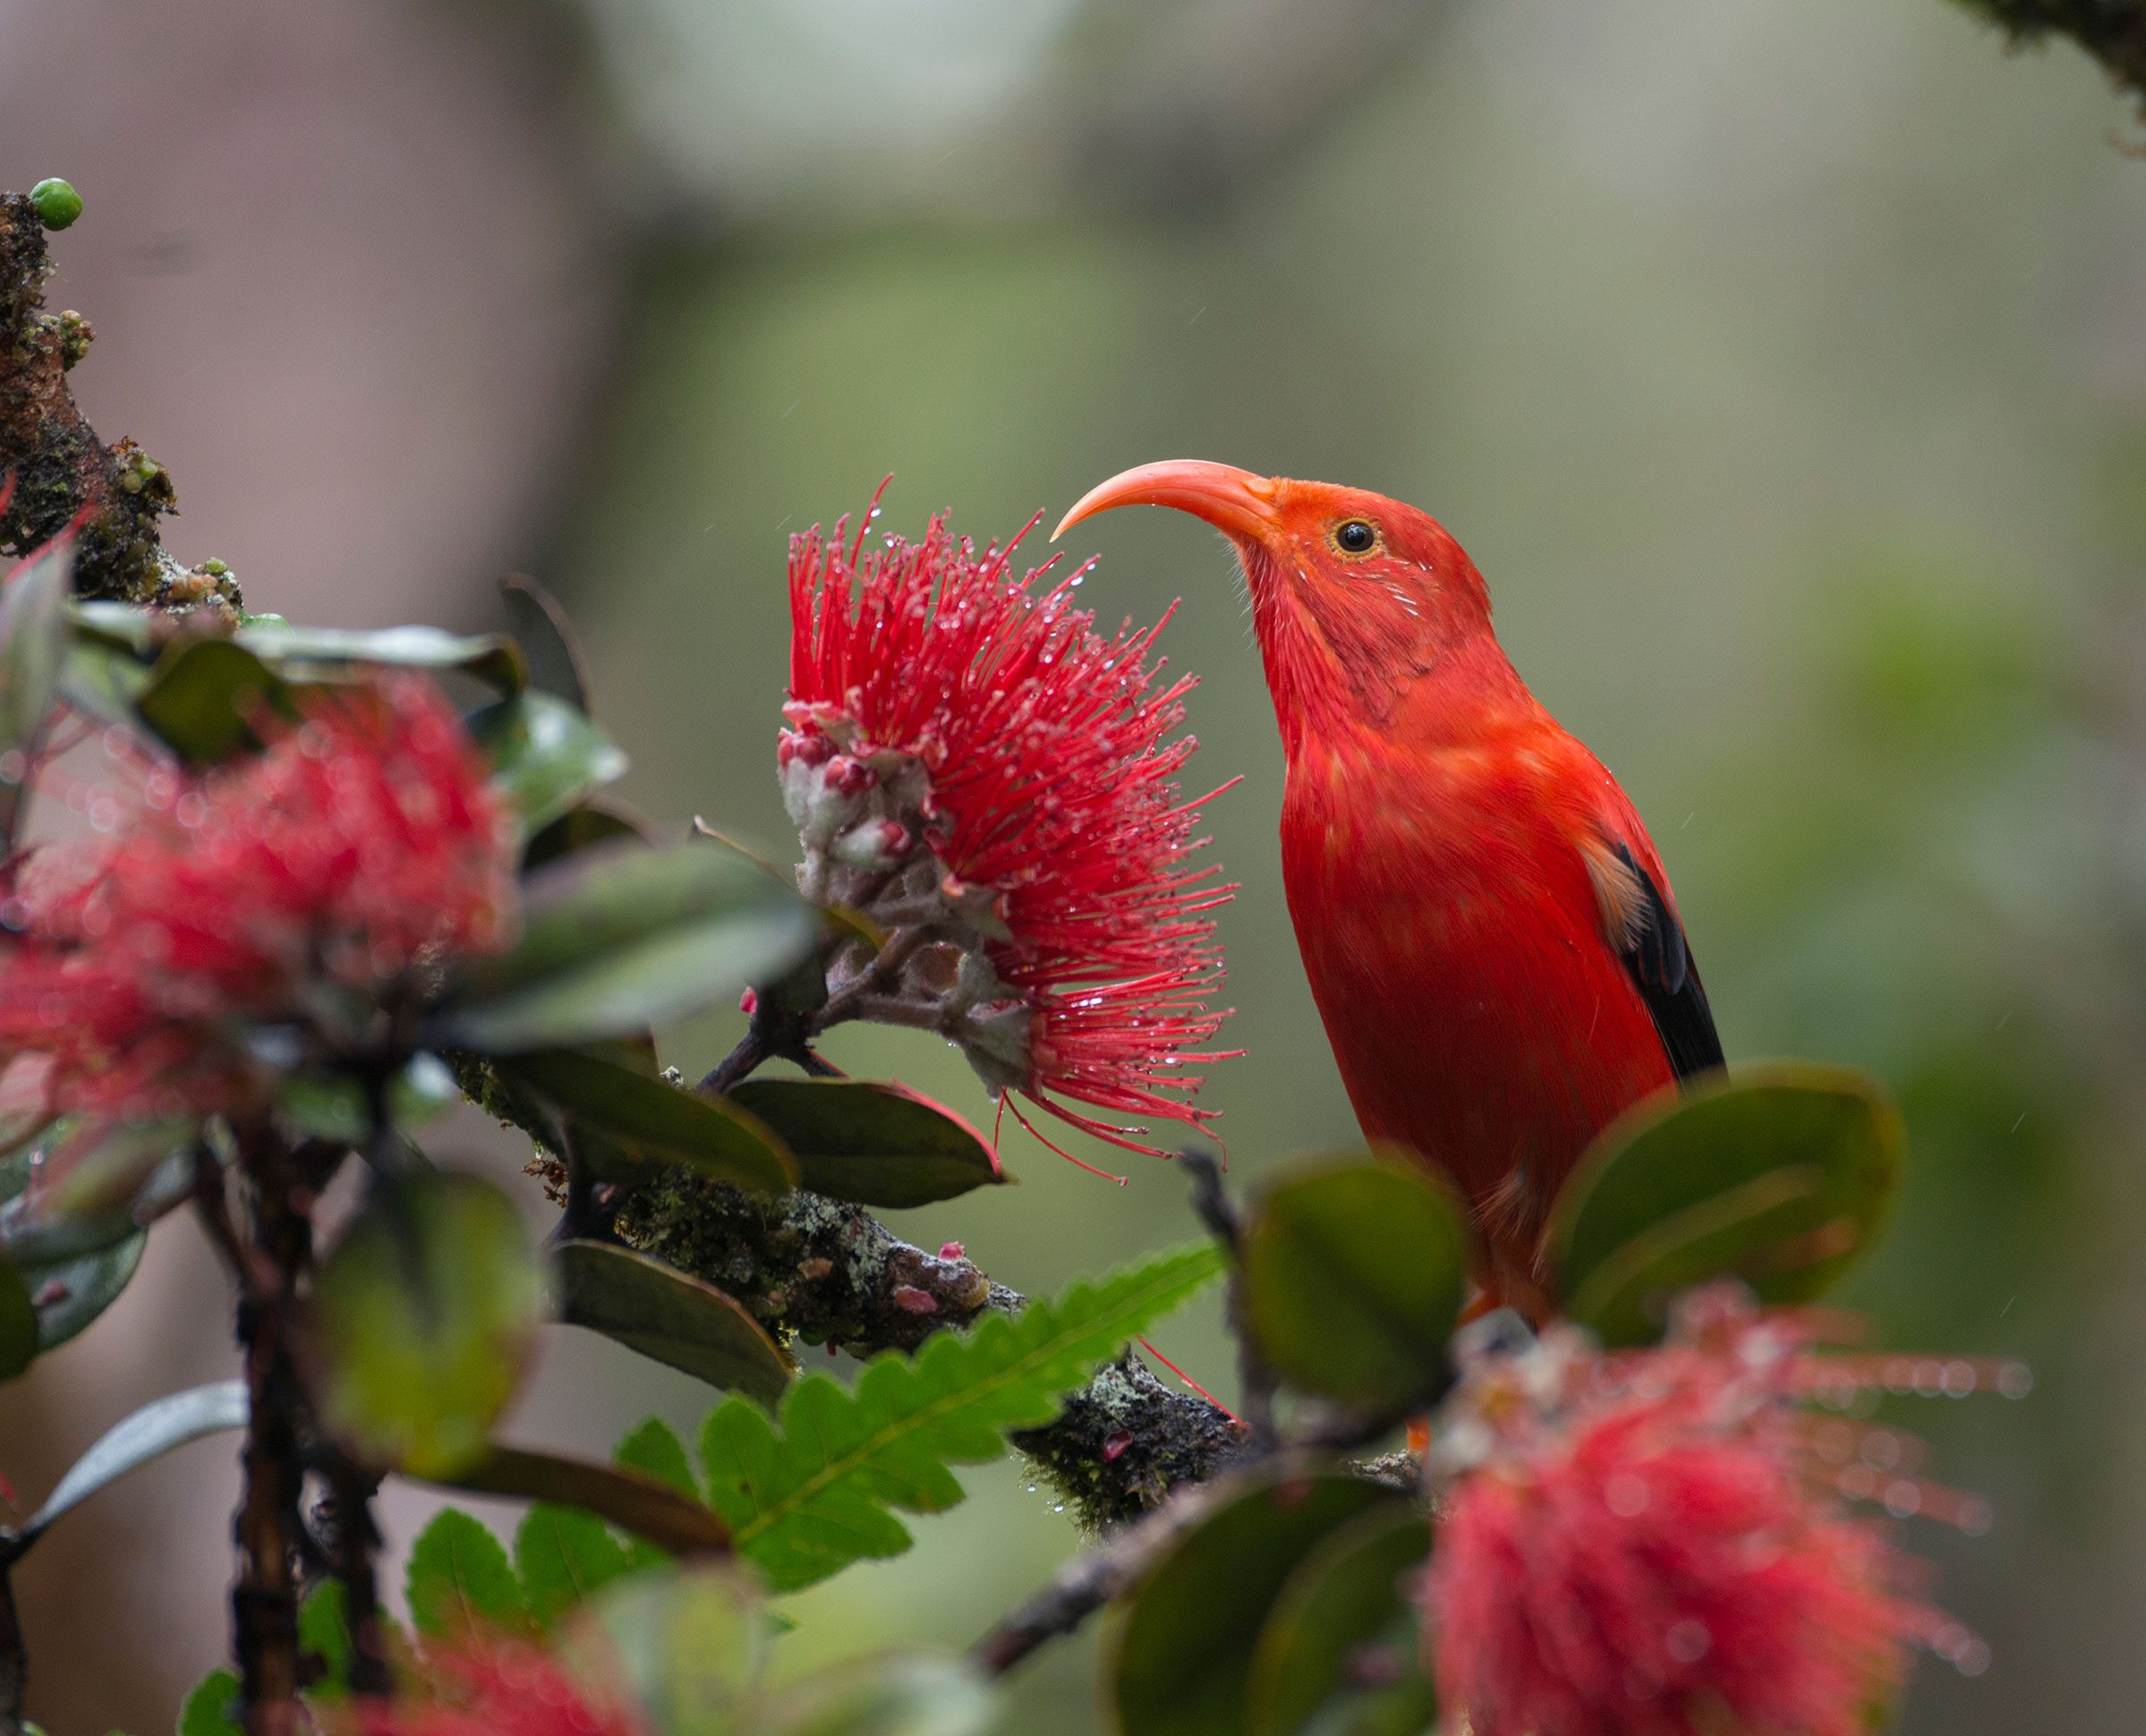 An Iiwi on an Ohia tree that is a major food source for this bird. Photo by Jim Denny.